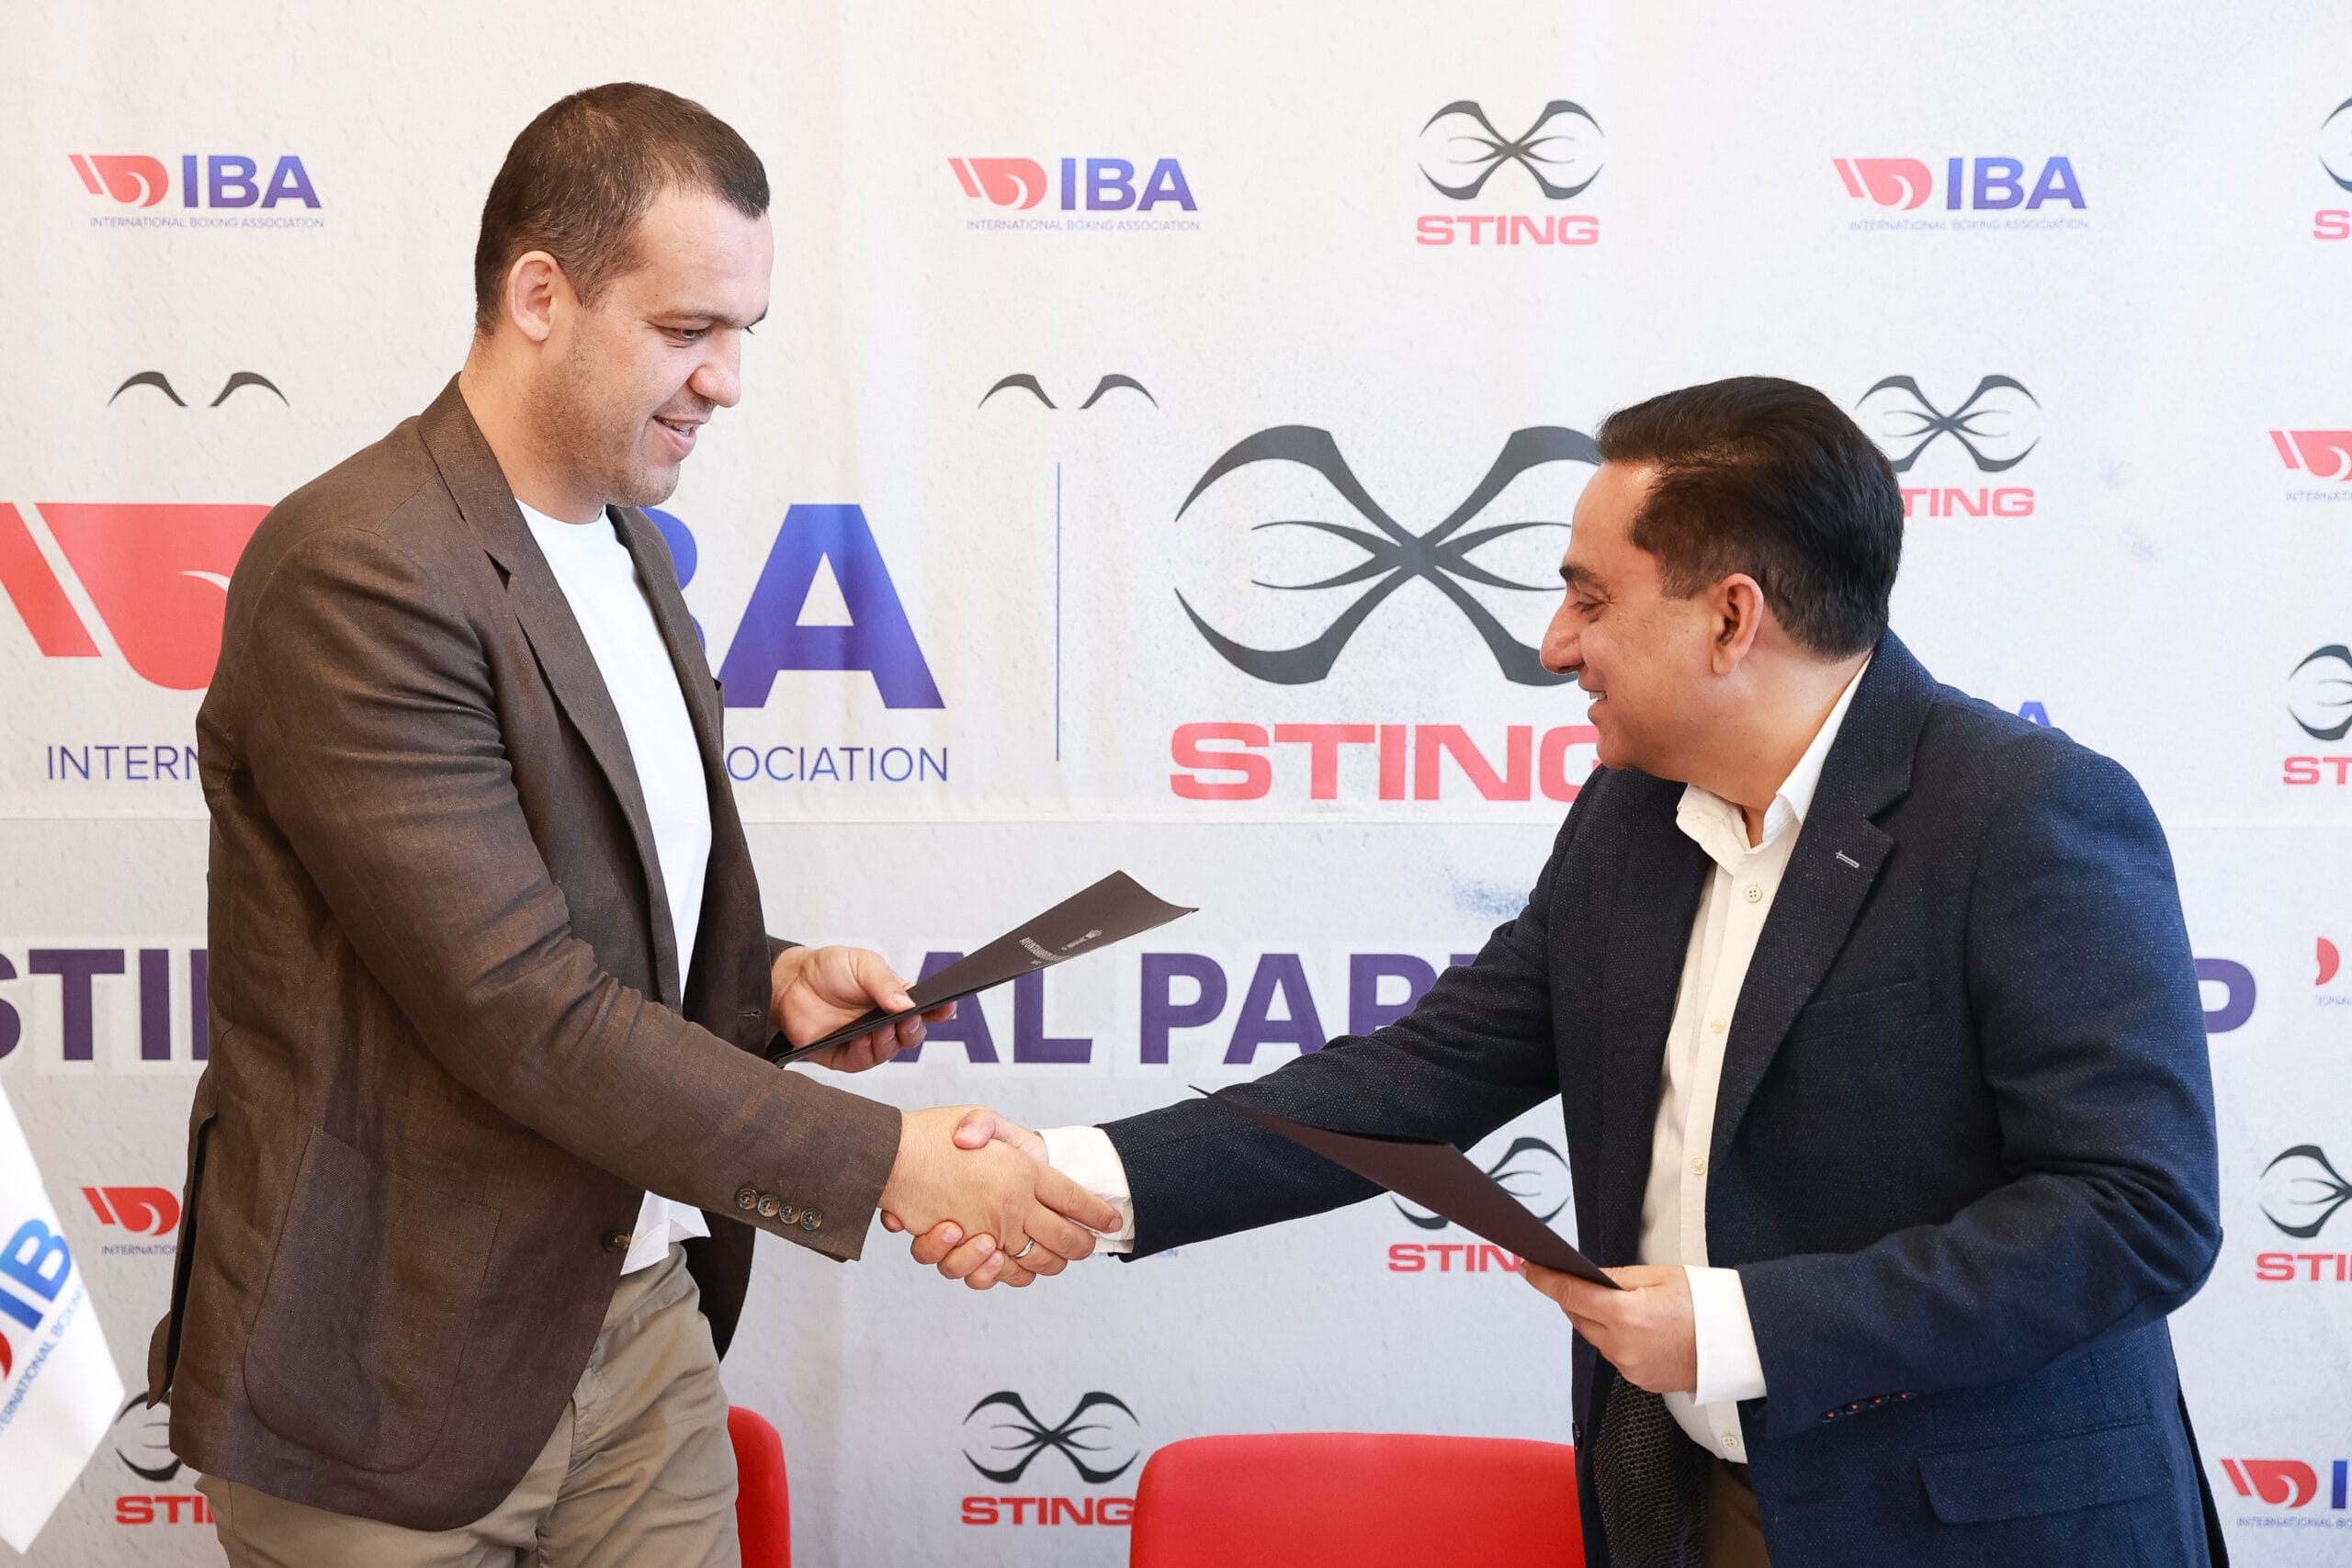 IBA partners with STING, signs 6-year sponsorship agreement